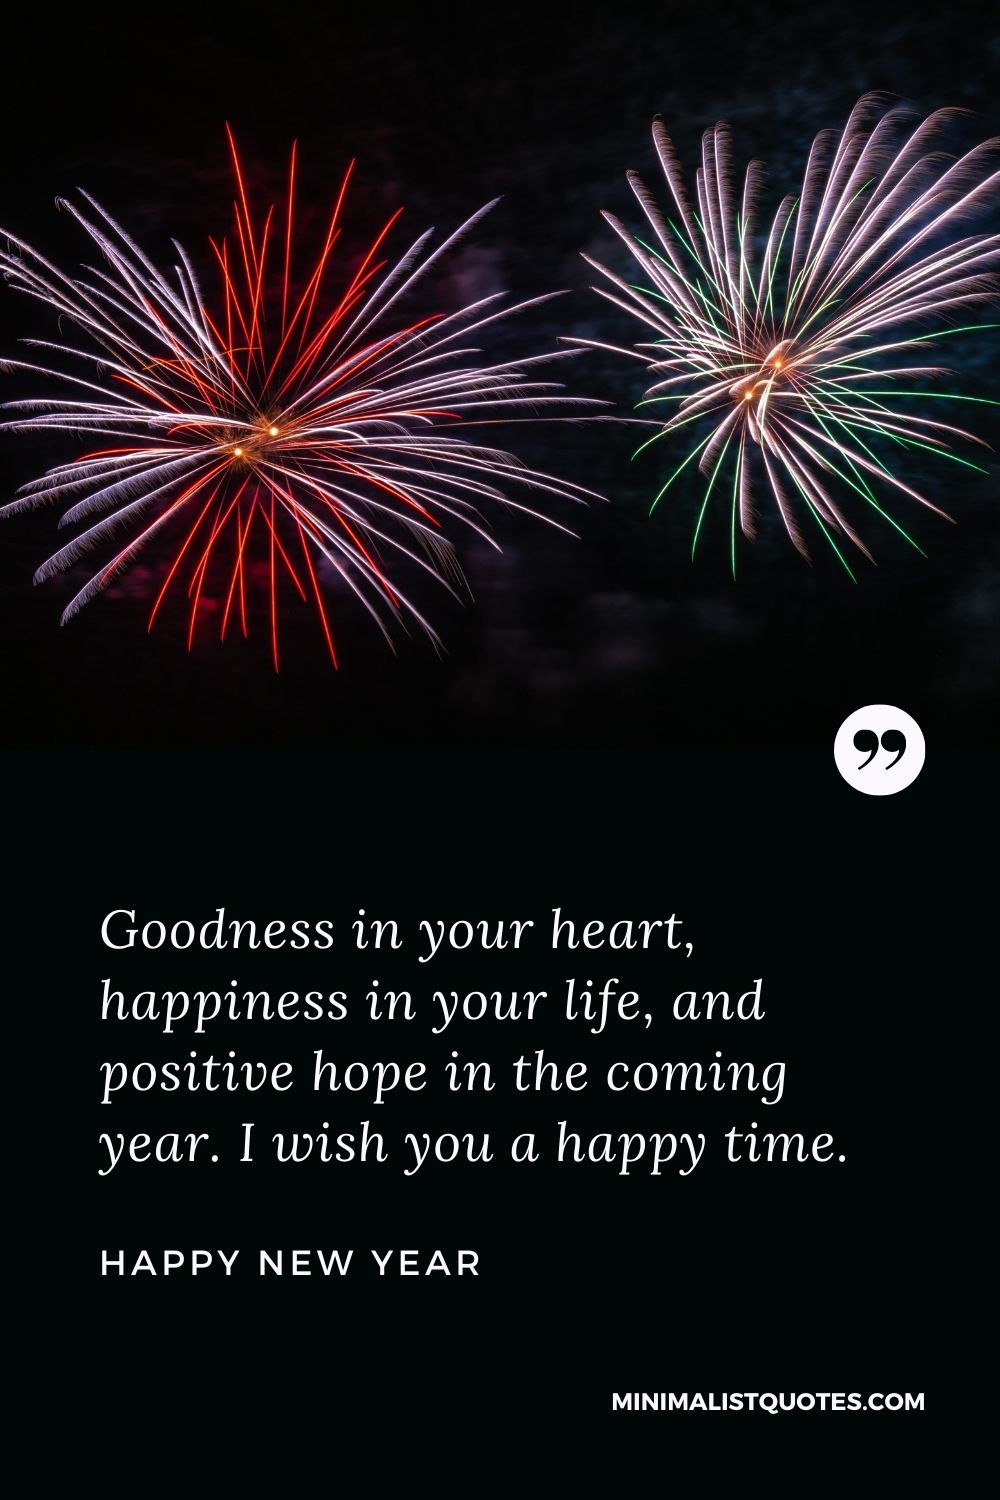 New Year Wish - Goodness in your heart, happiness in your life, and positive hope in the coming year. I wish you a happy time.